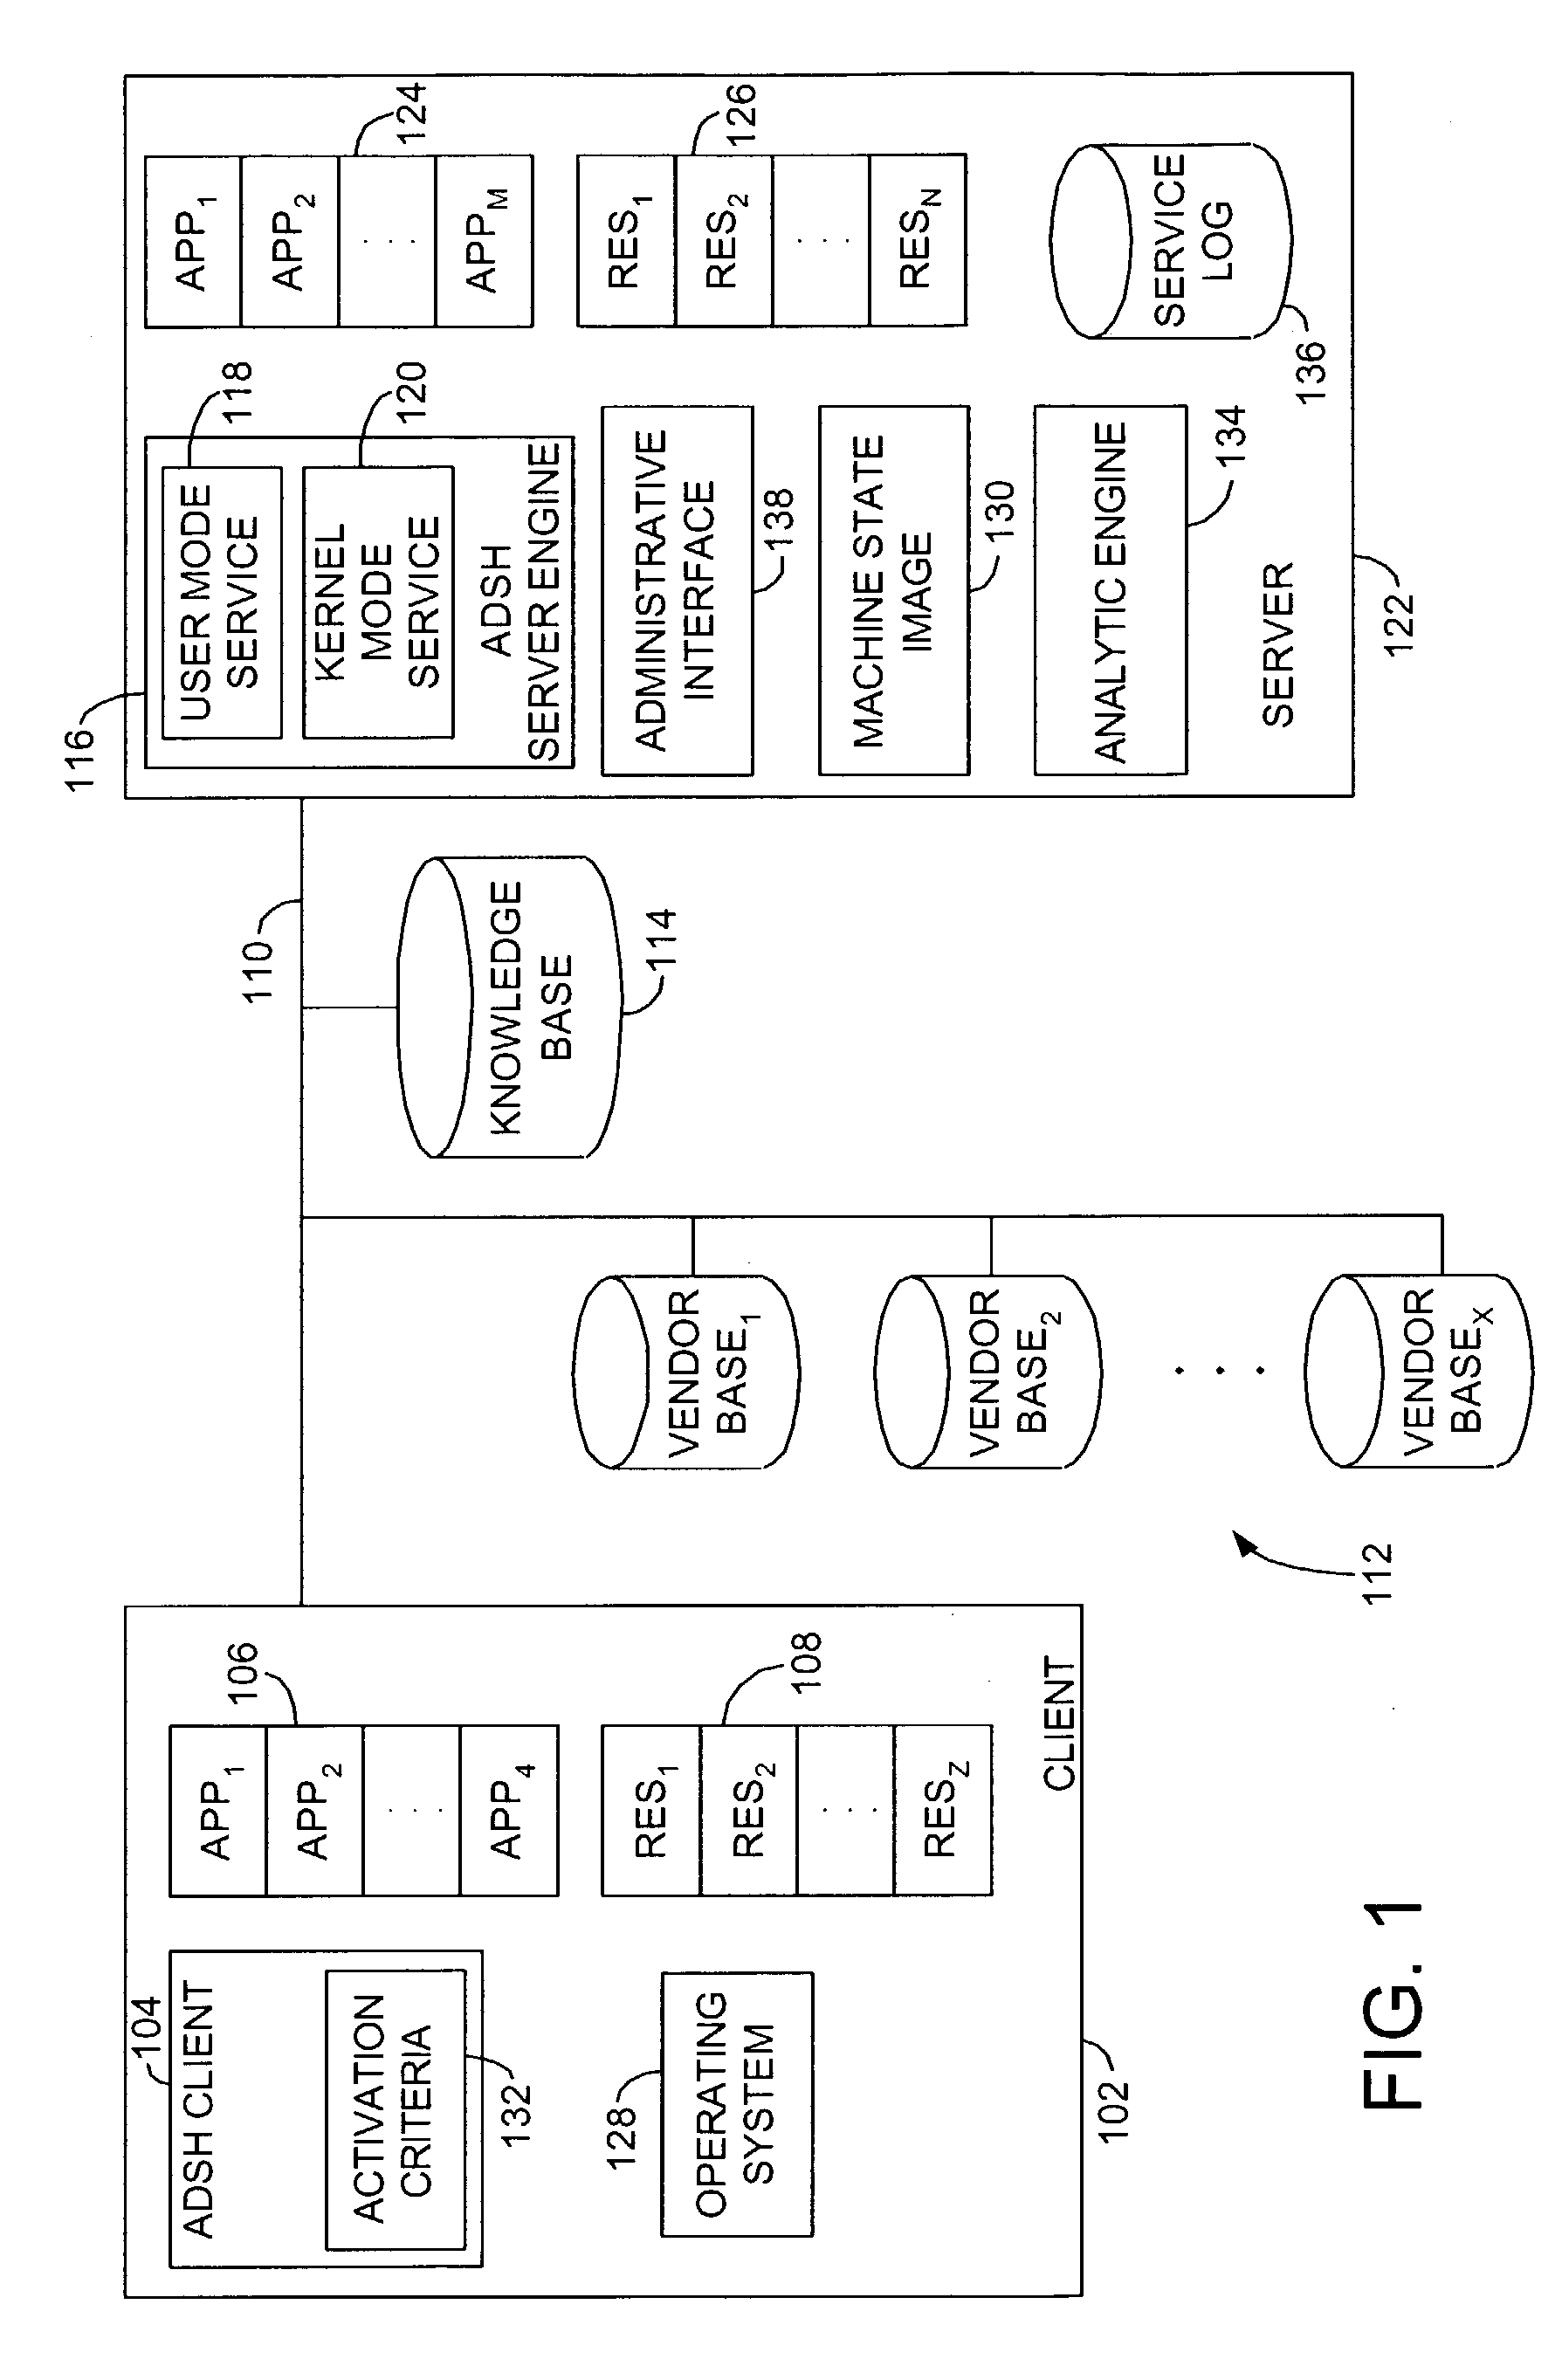 System and method for active diagnosis and self healing of software systems